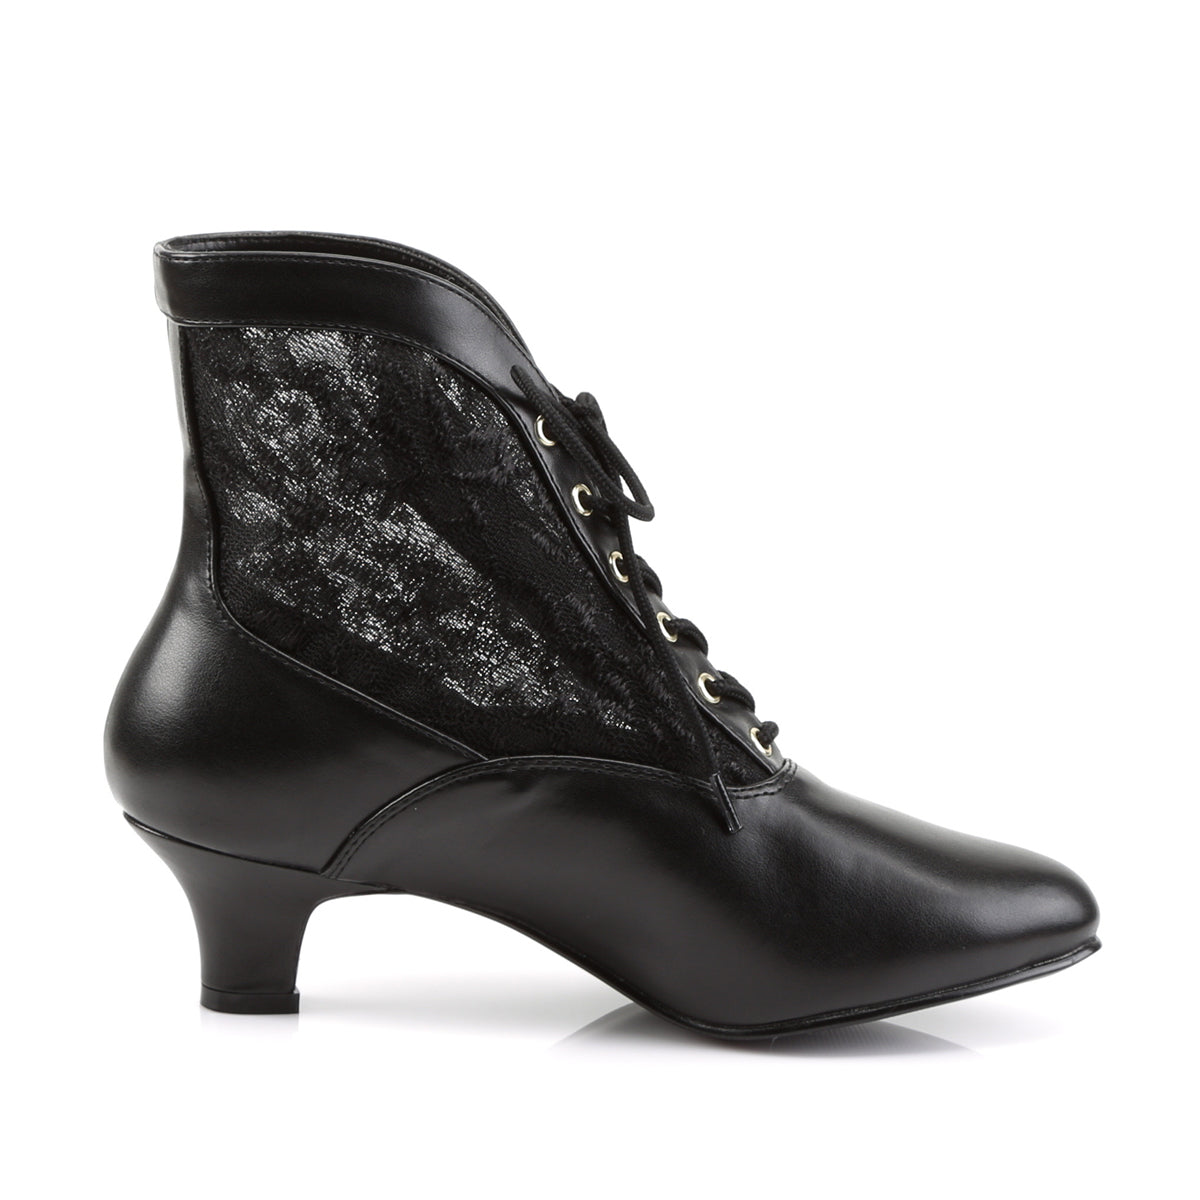 DAME-05 Black Ankle Boots Black Multi view 2